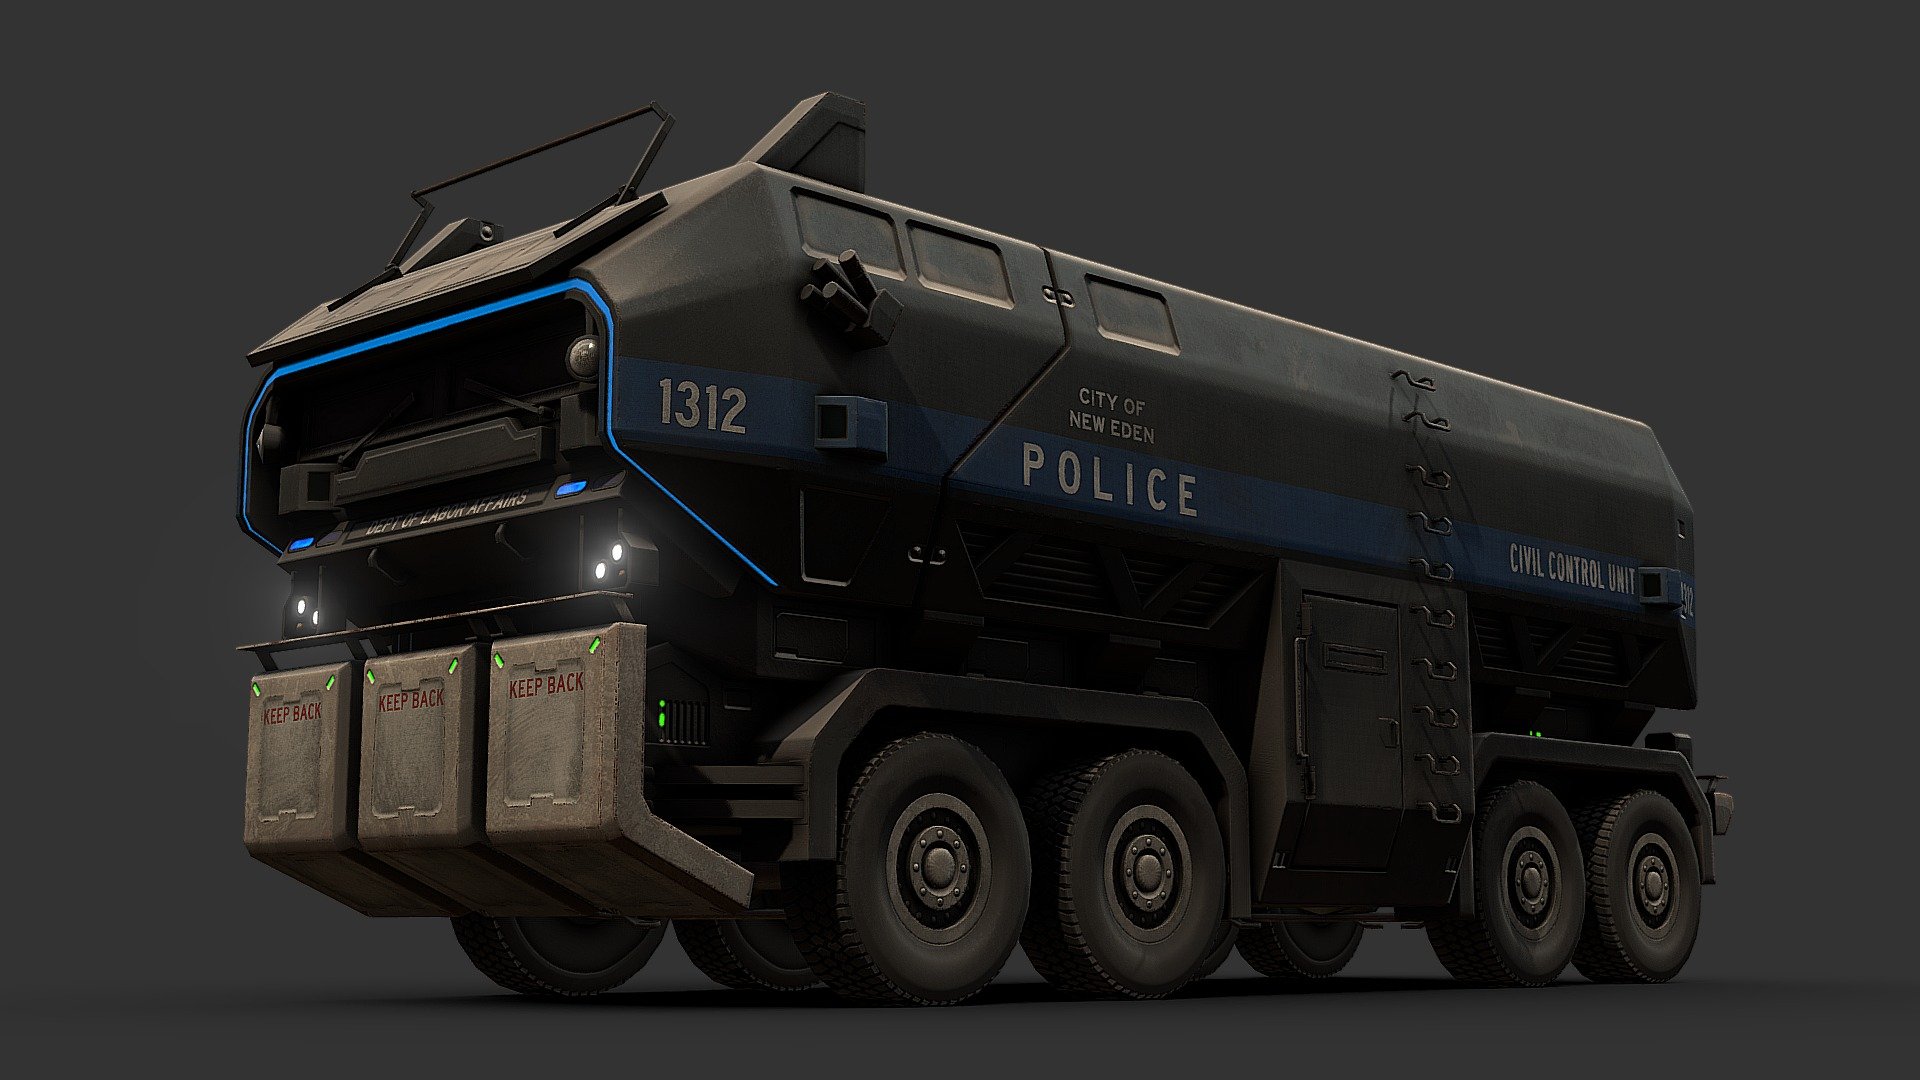 A colossal police vehicle, perfect for putting down anyone your authority doesn't want in their &ldquo;perfect world